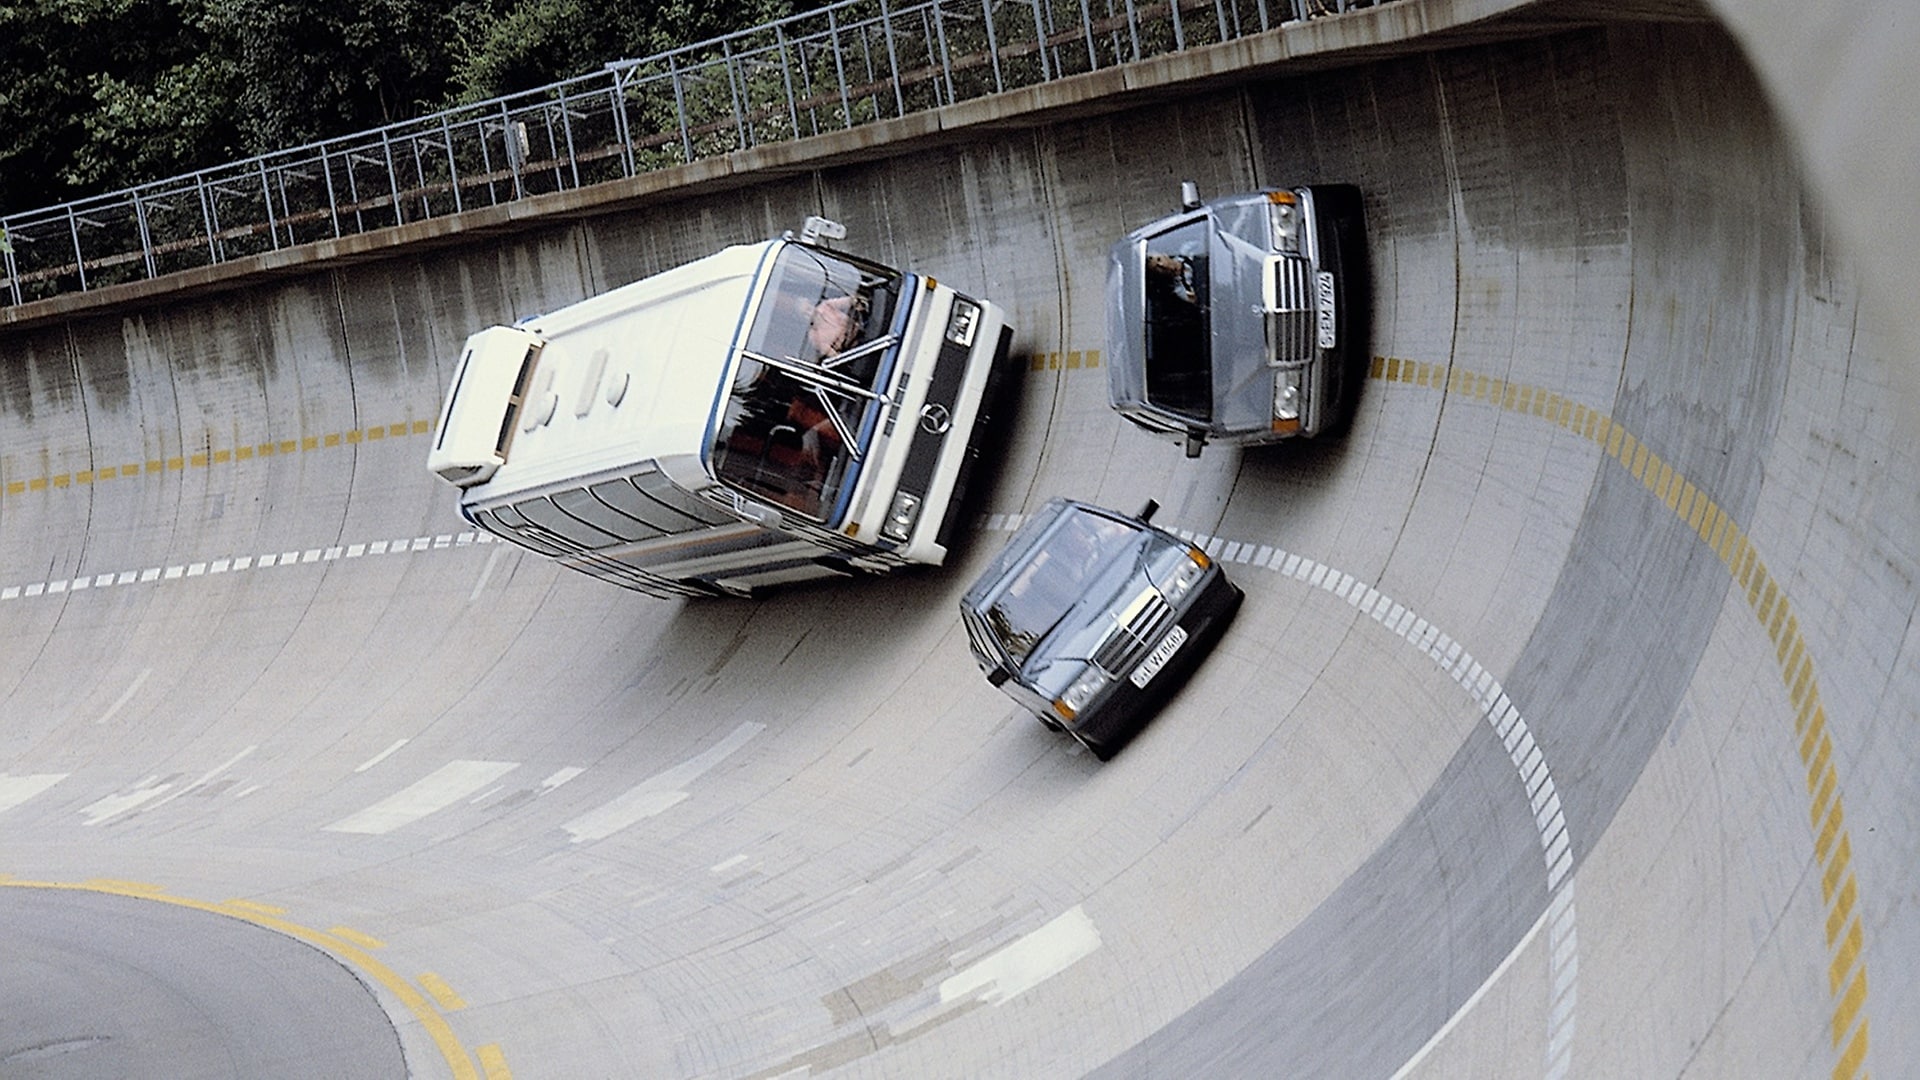 In the high-bank curve of the test track: a Mercedes-Benz Saloon from the 201 model series, an S-Class Saloon from the 126 model series and an O 303 touring coach, 1984.